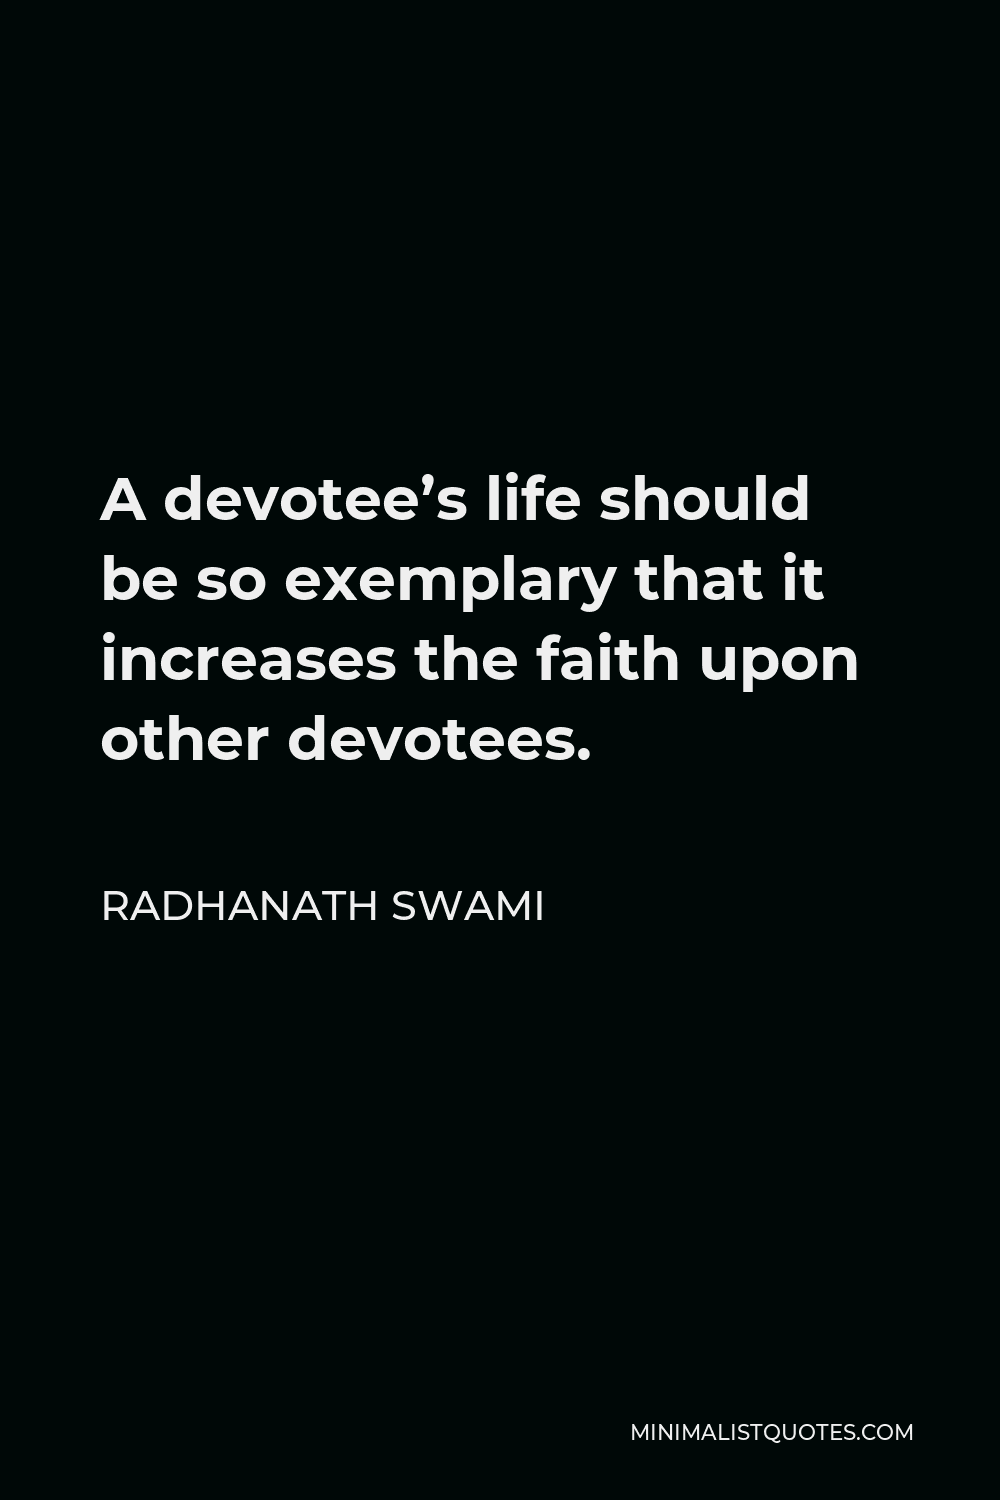 Radhanath Swami Quote - A devotee’s life should be so exemplary that it increases the faith upon other devotees.